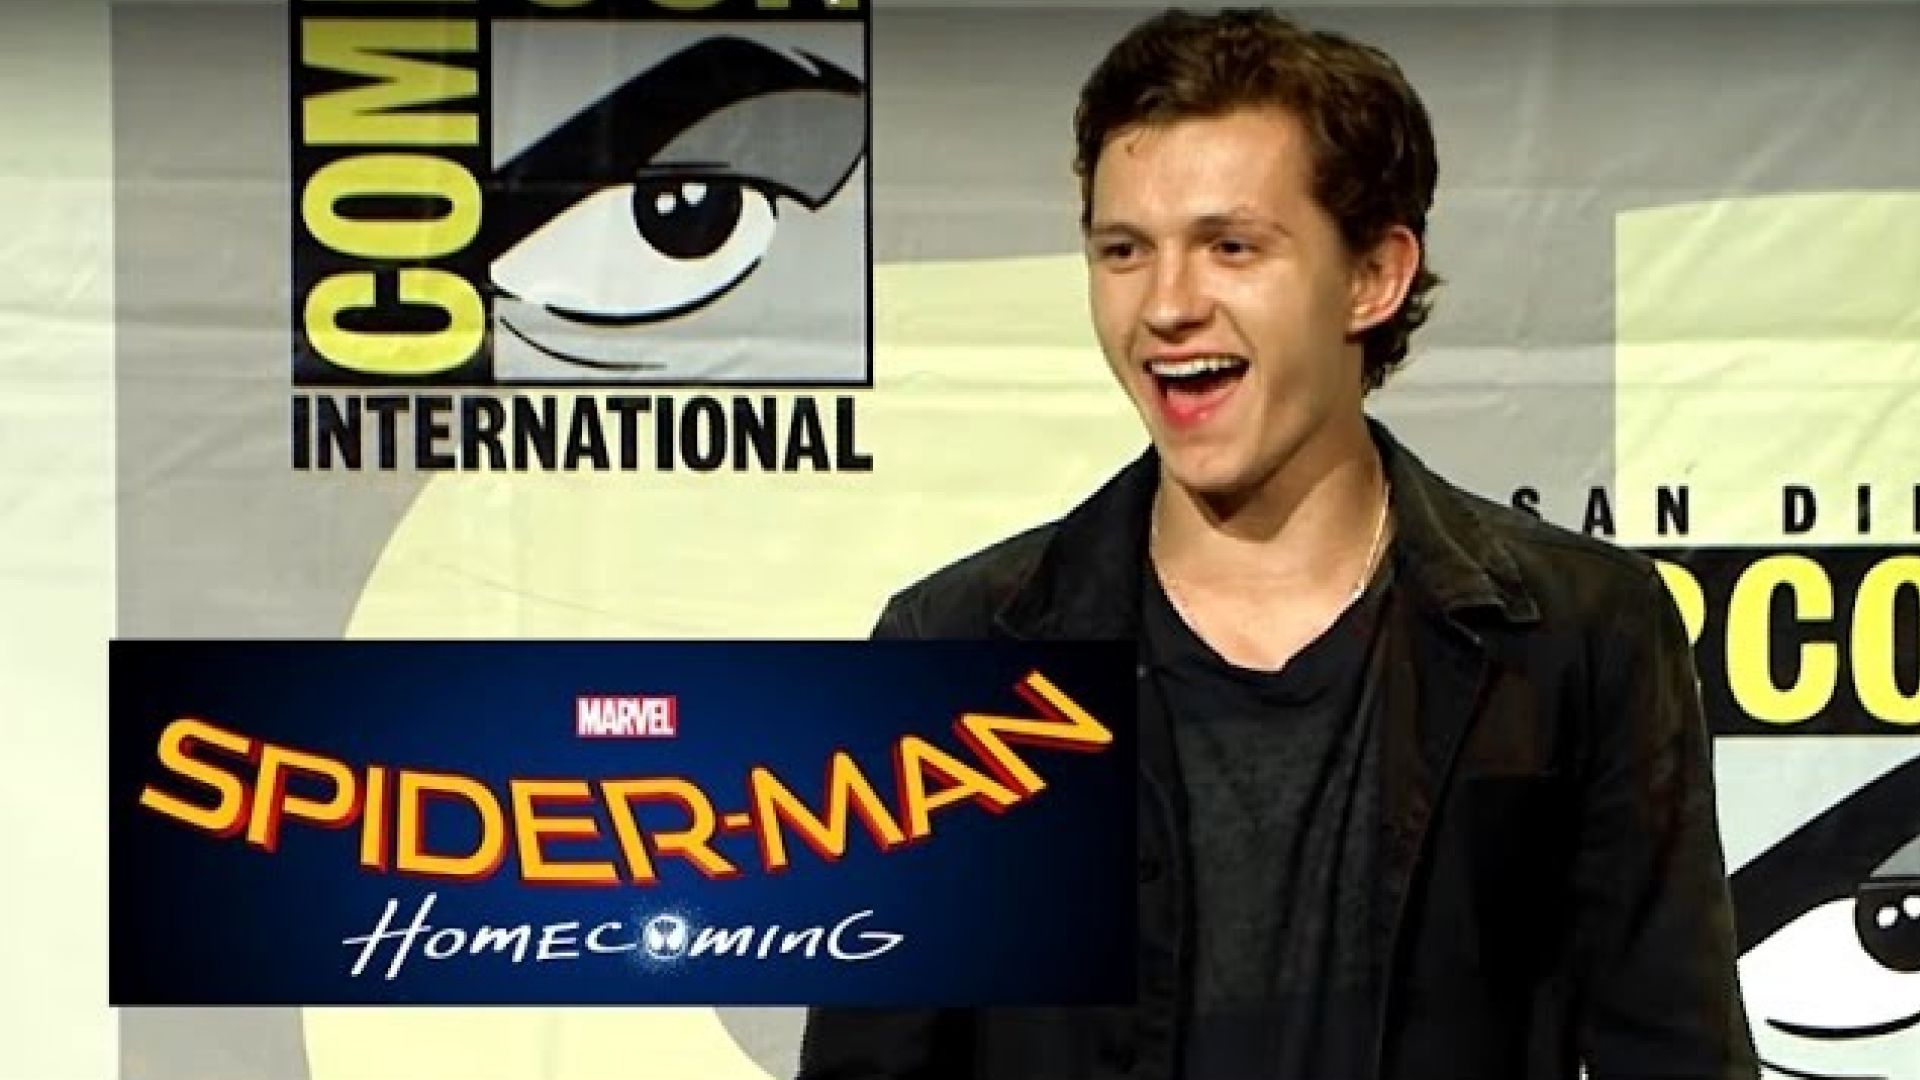 Check out the Spider-Man; Homecoming panel from Hall H at SD